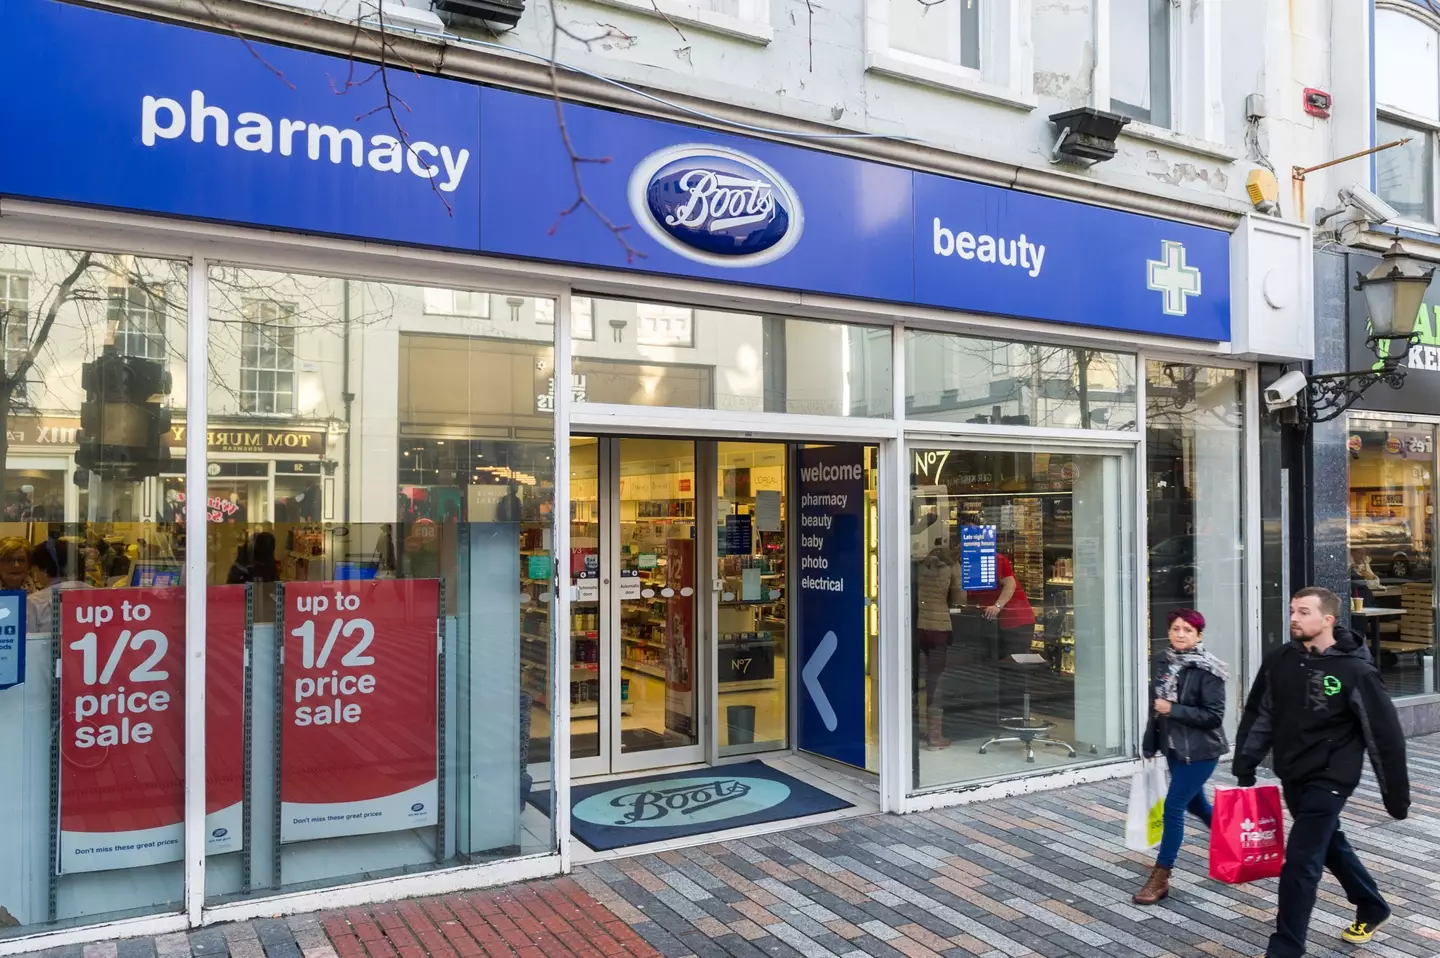 Boots will start selling the antigen tests from Wednesday (